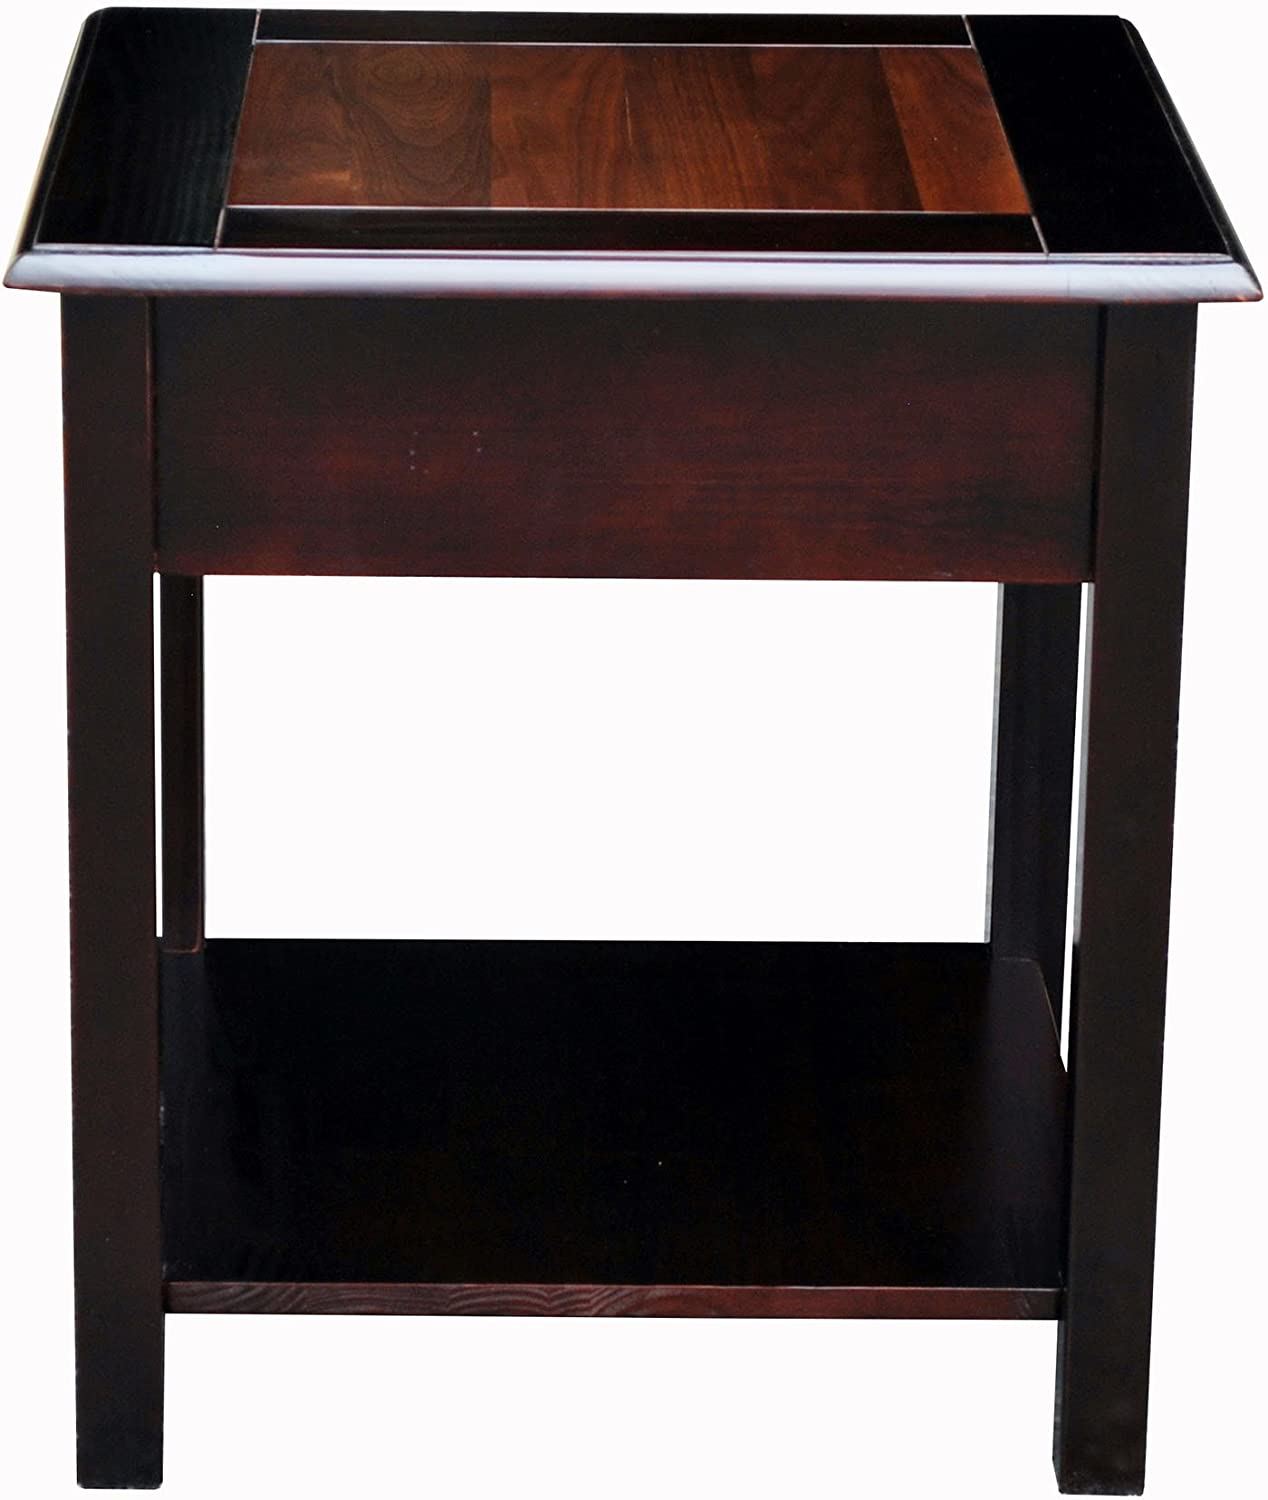 American Trails Nassau End Table with American Walnut Top